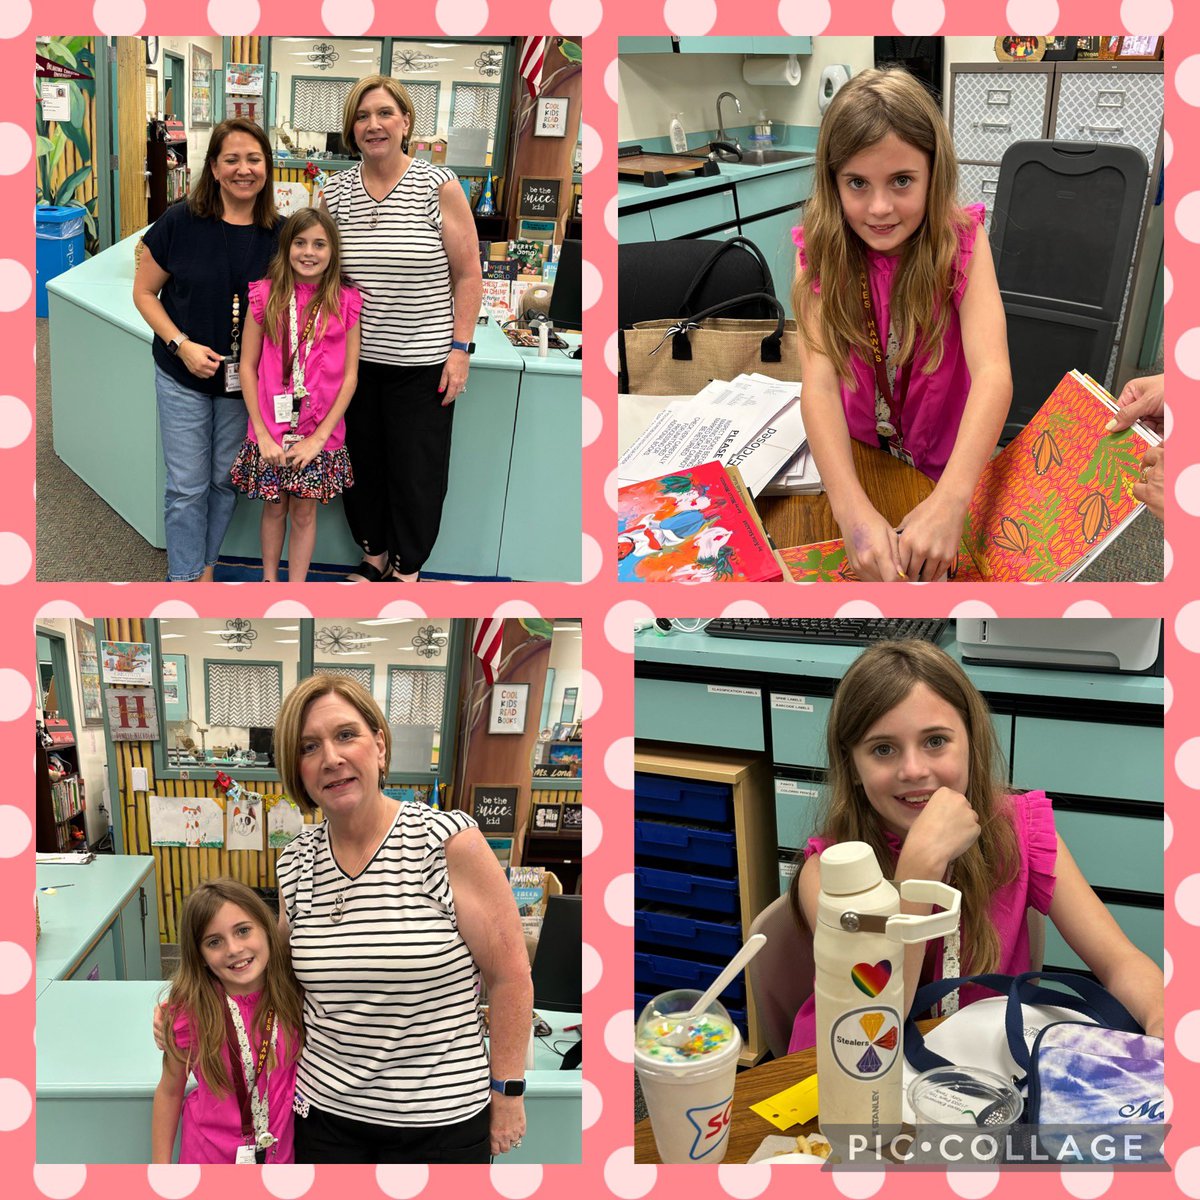 Our amazing librarian for the day! We worked her hard, but she loved it! #hayeshawks #katyisd #ilovemyjob